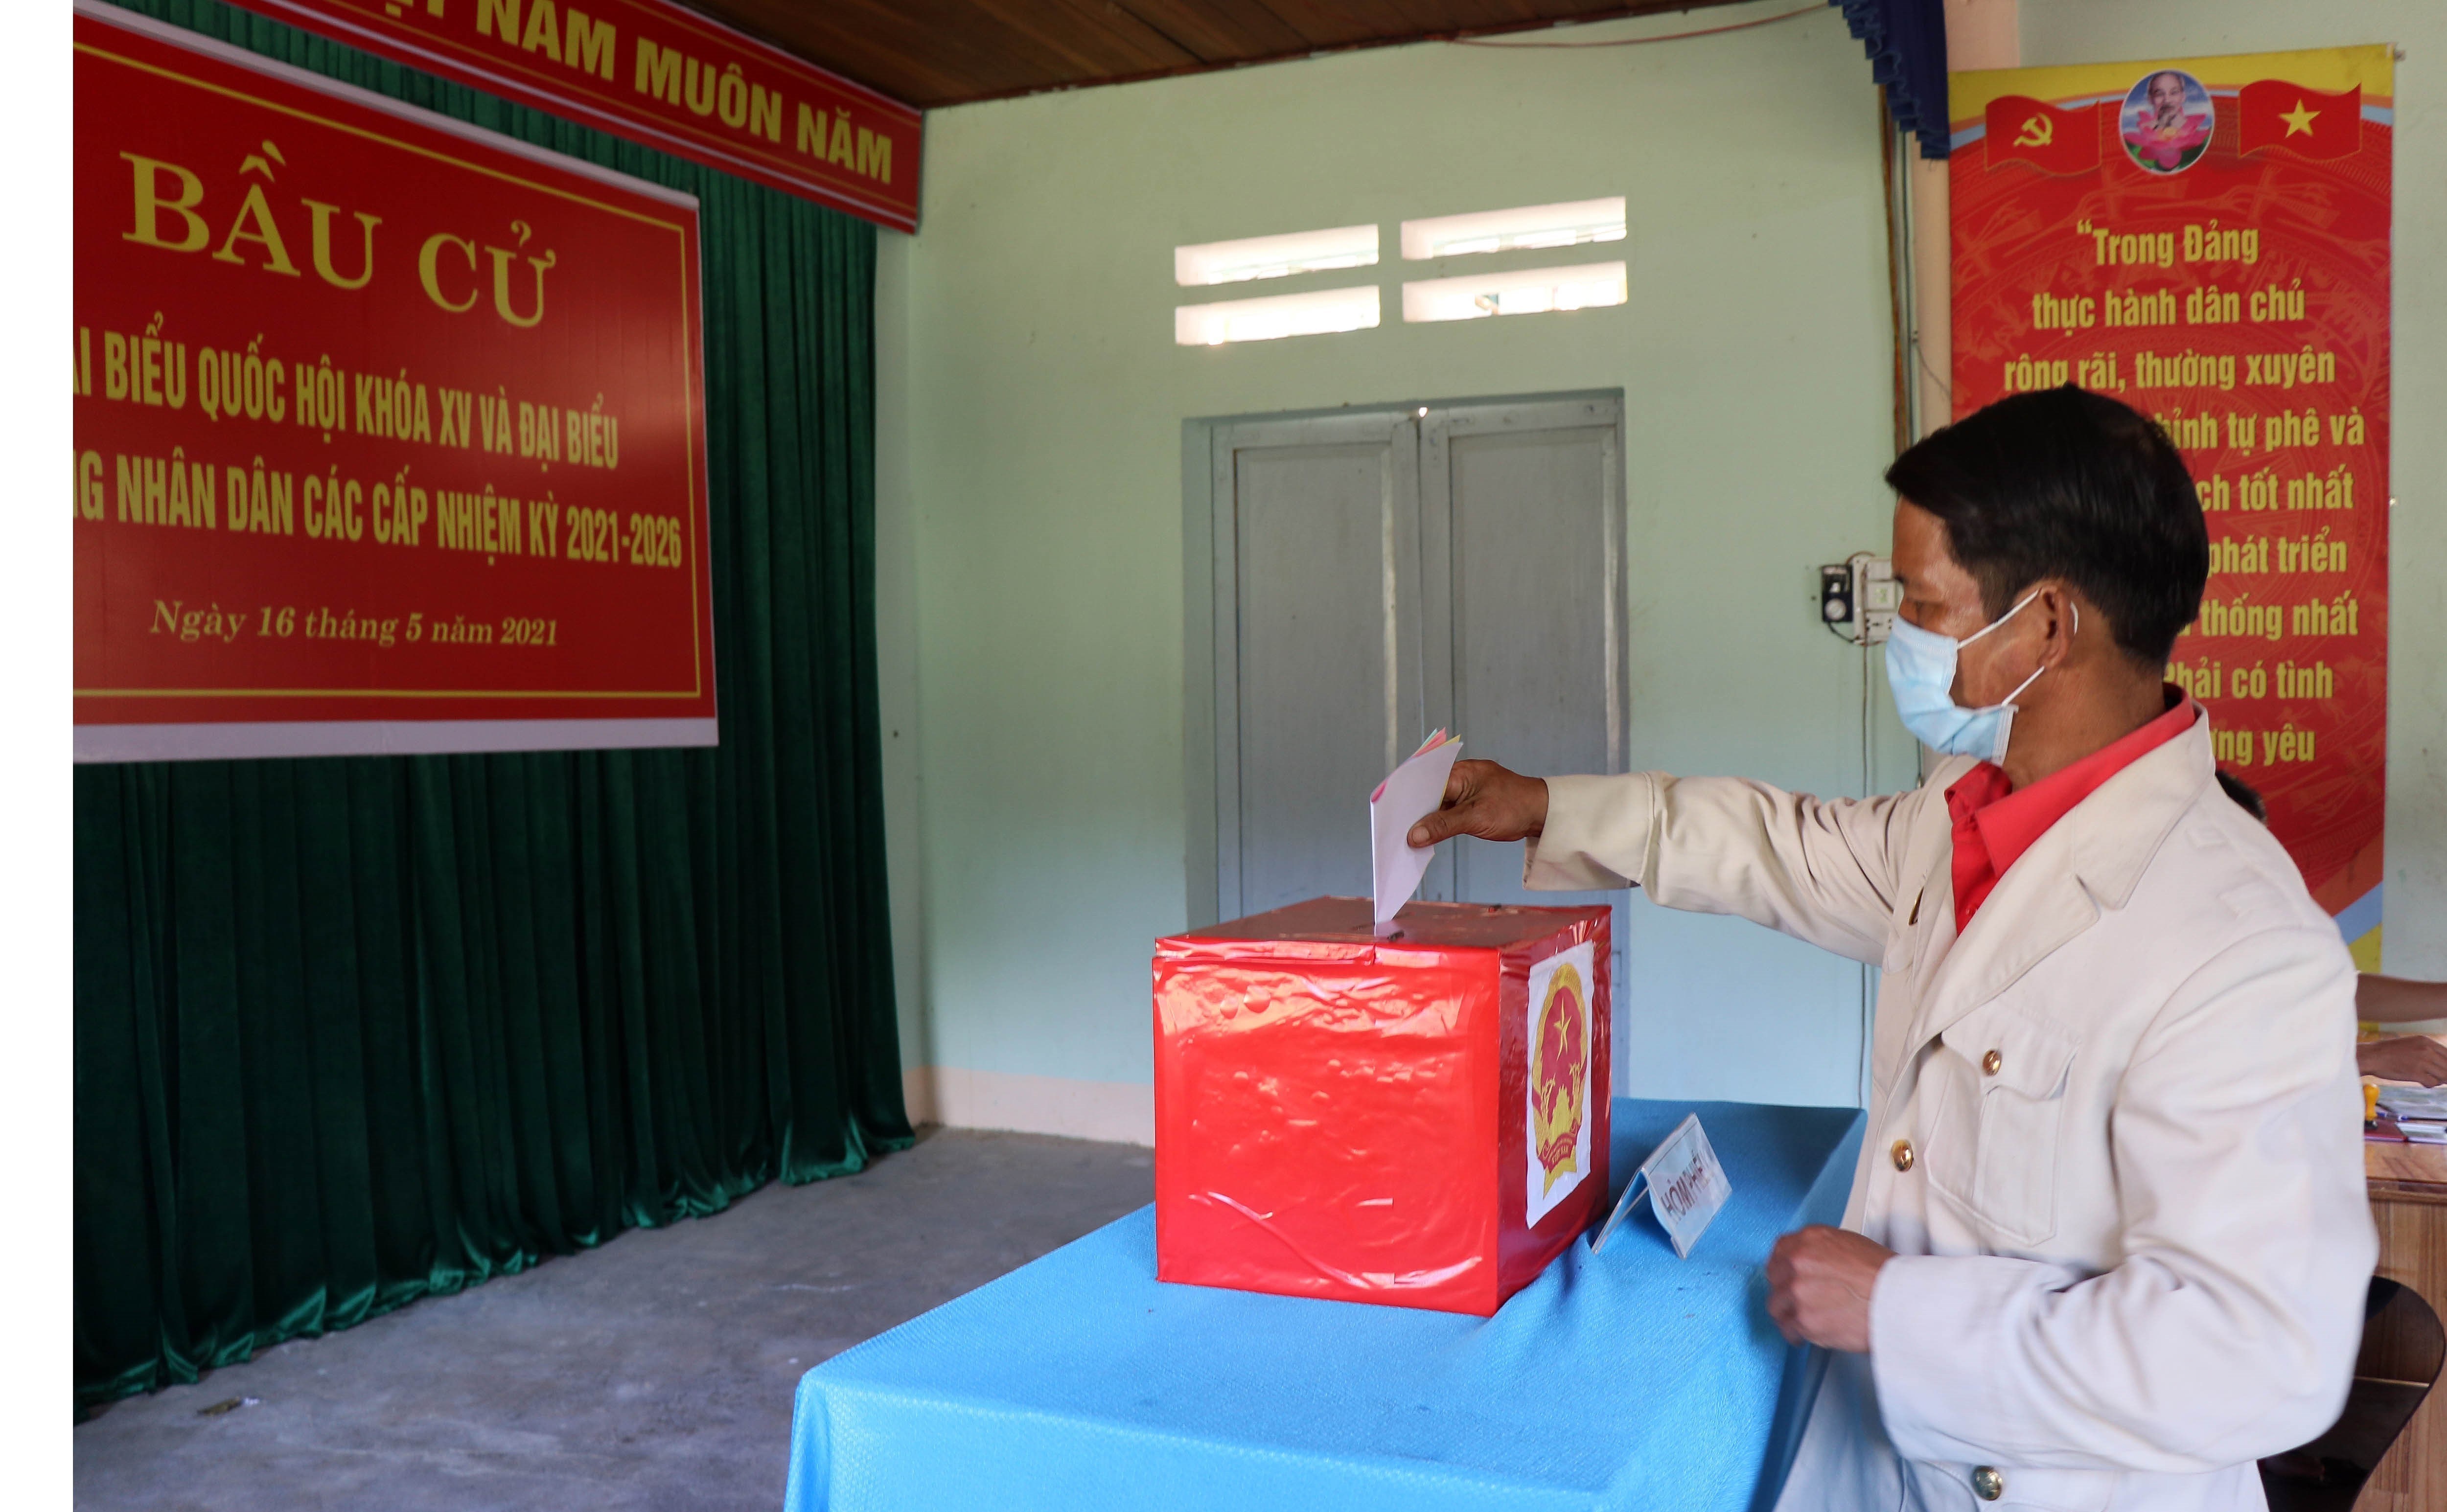 Early voting held in remote areas of Quang Nam province hinh anh 2